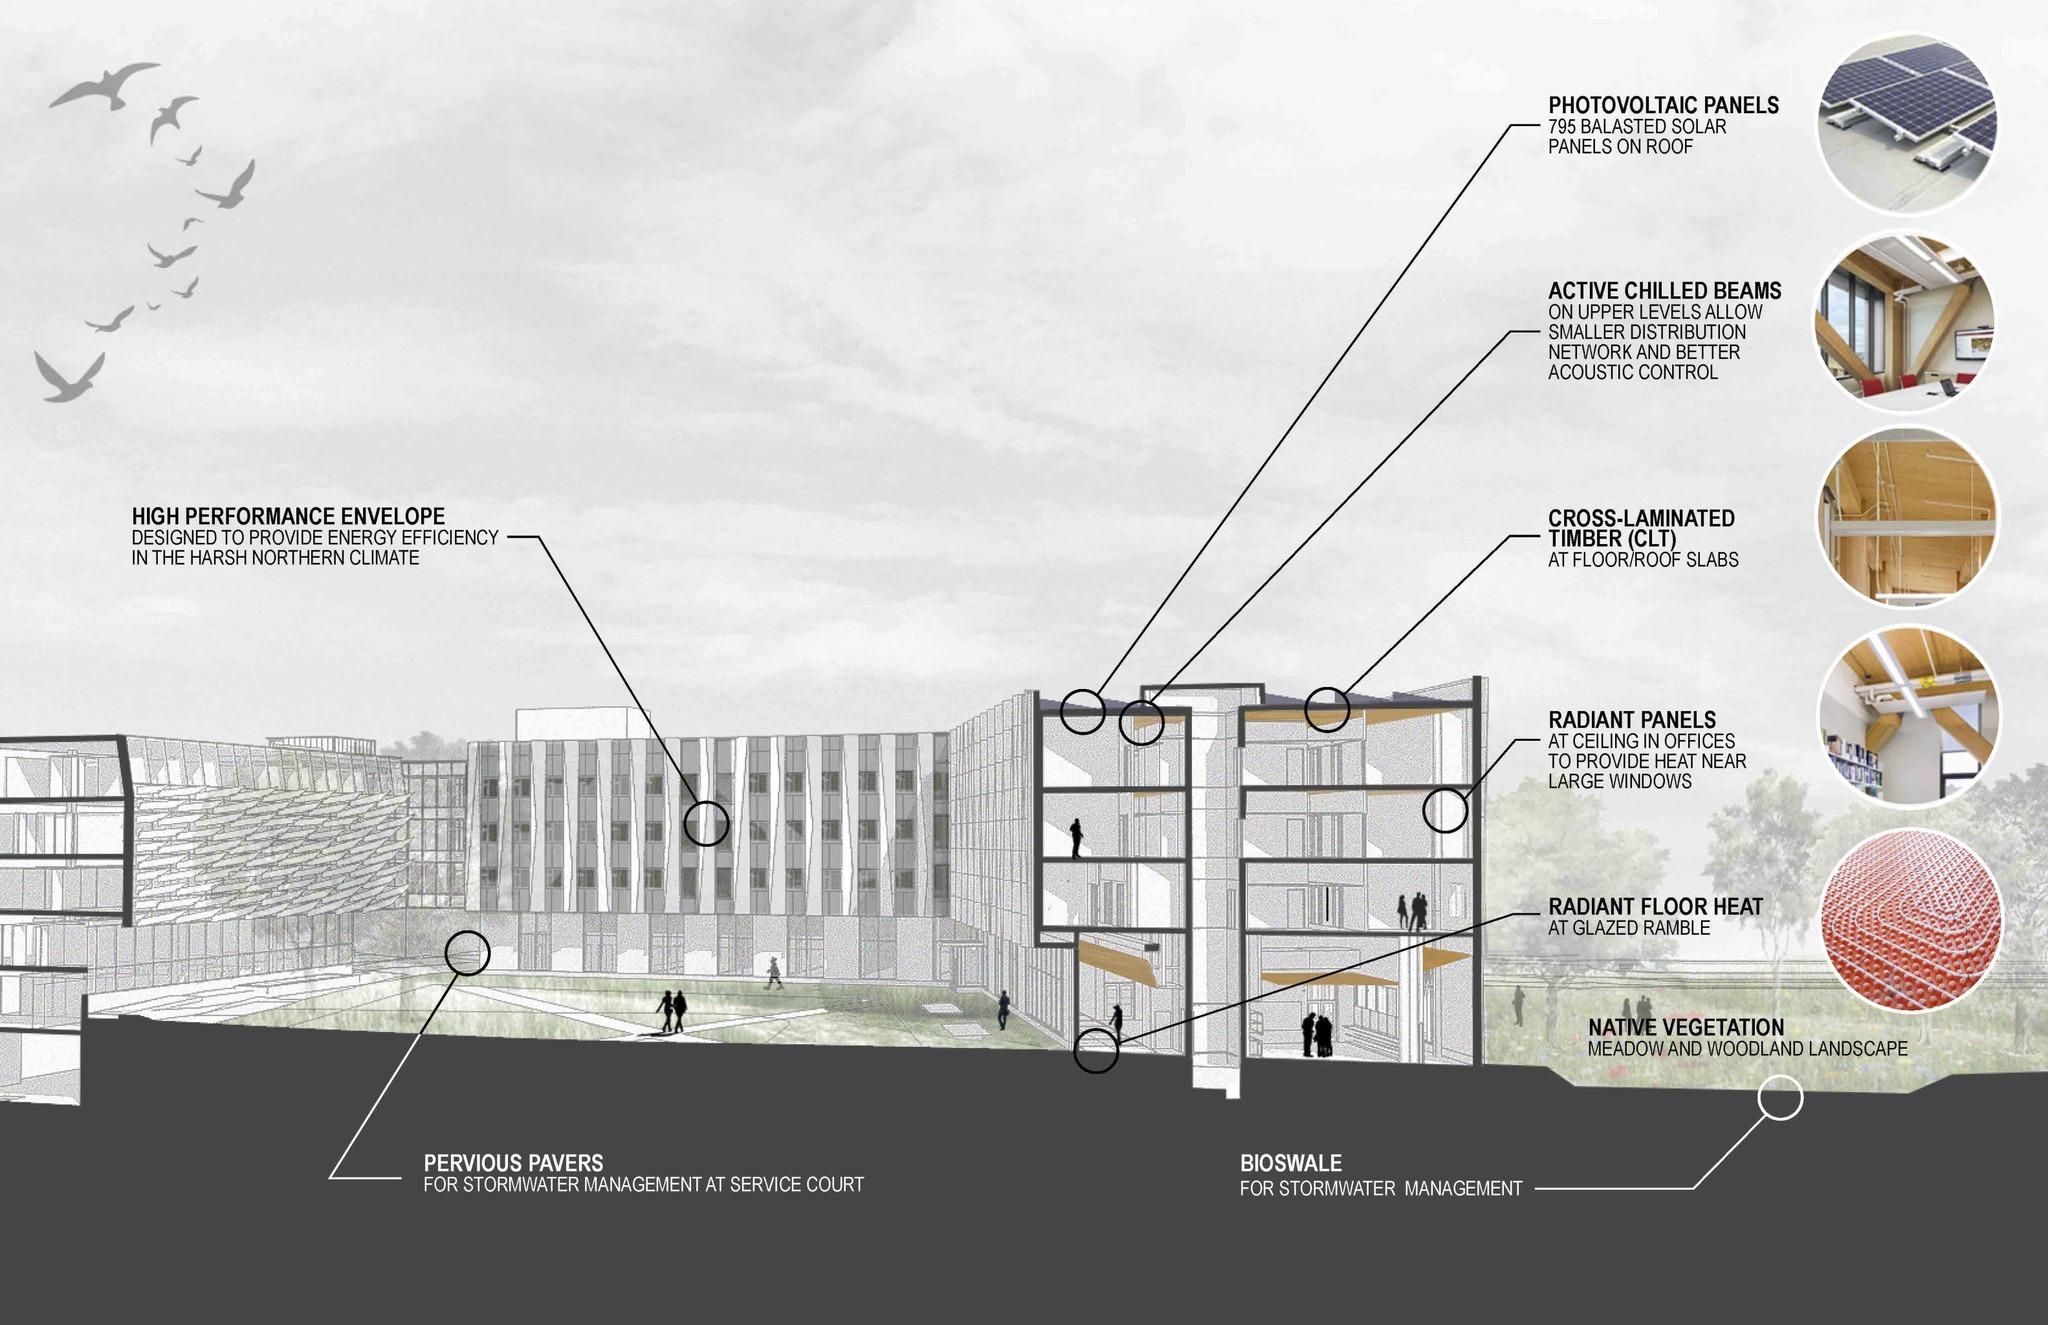 A sustainability diagram for the new building - Courtesy of Leers Weinzapfel Associates